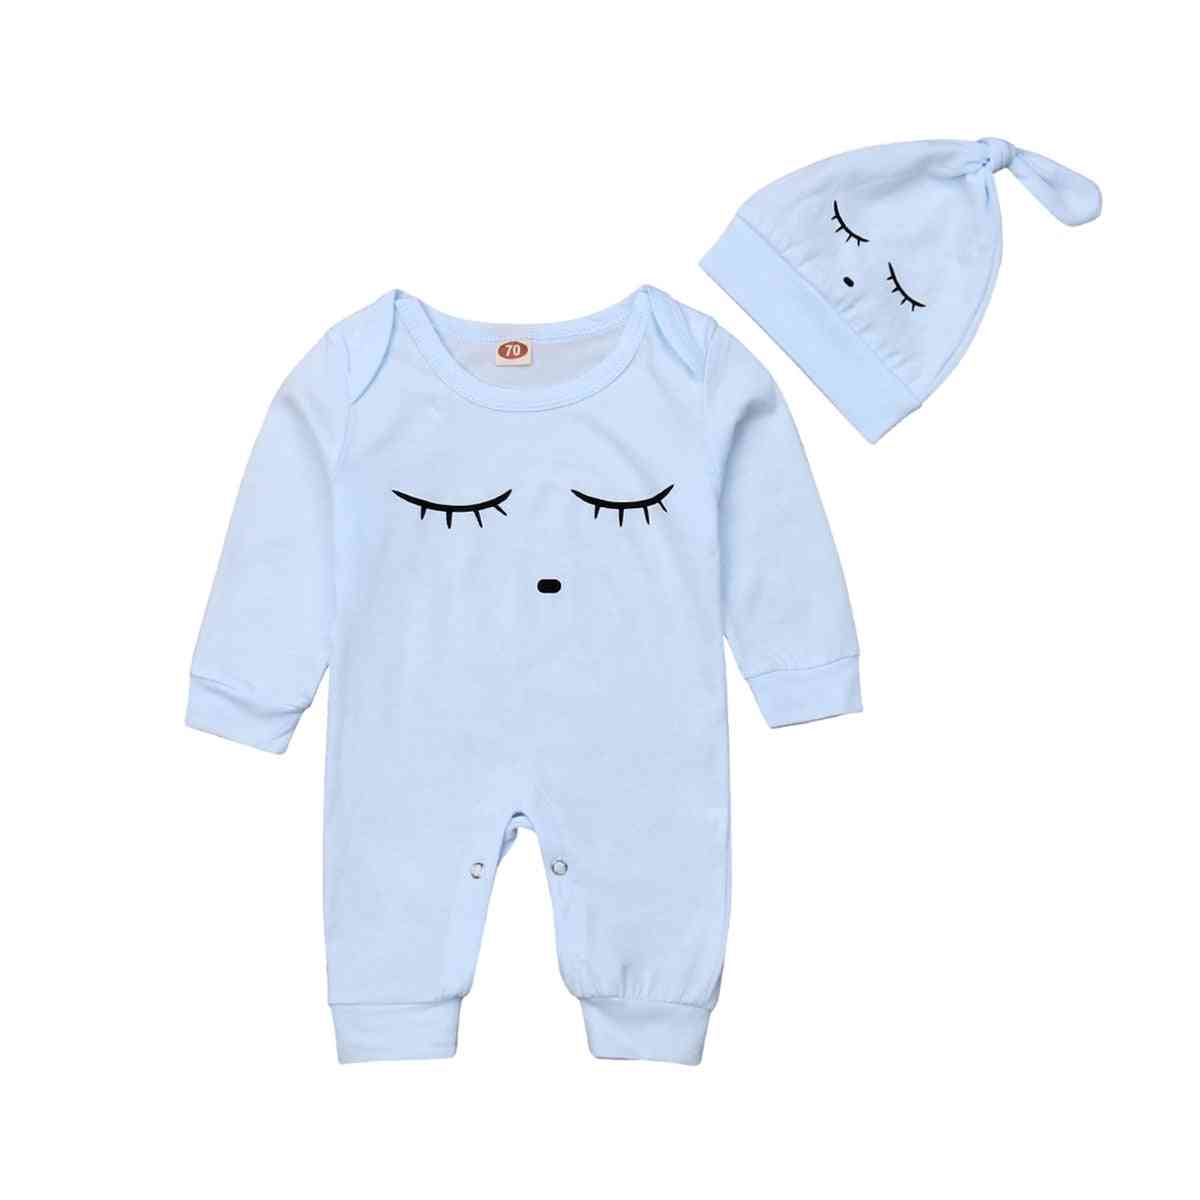 Newborn, Boy Outfit, Long Sleeve Romper Jumpsuit - Spring Fashion